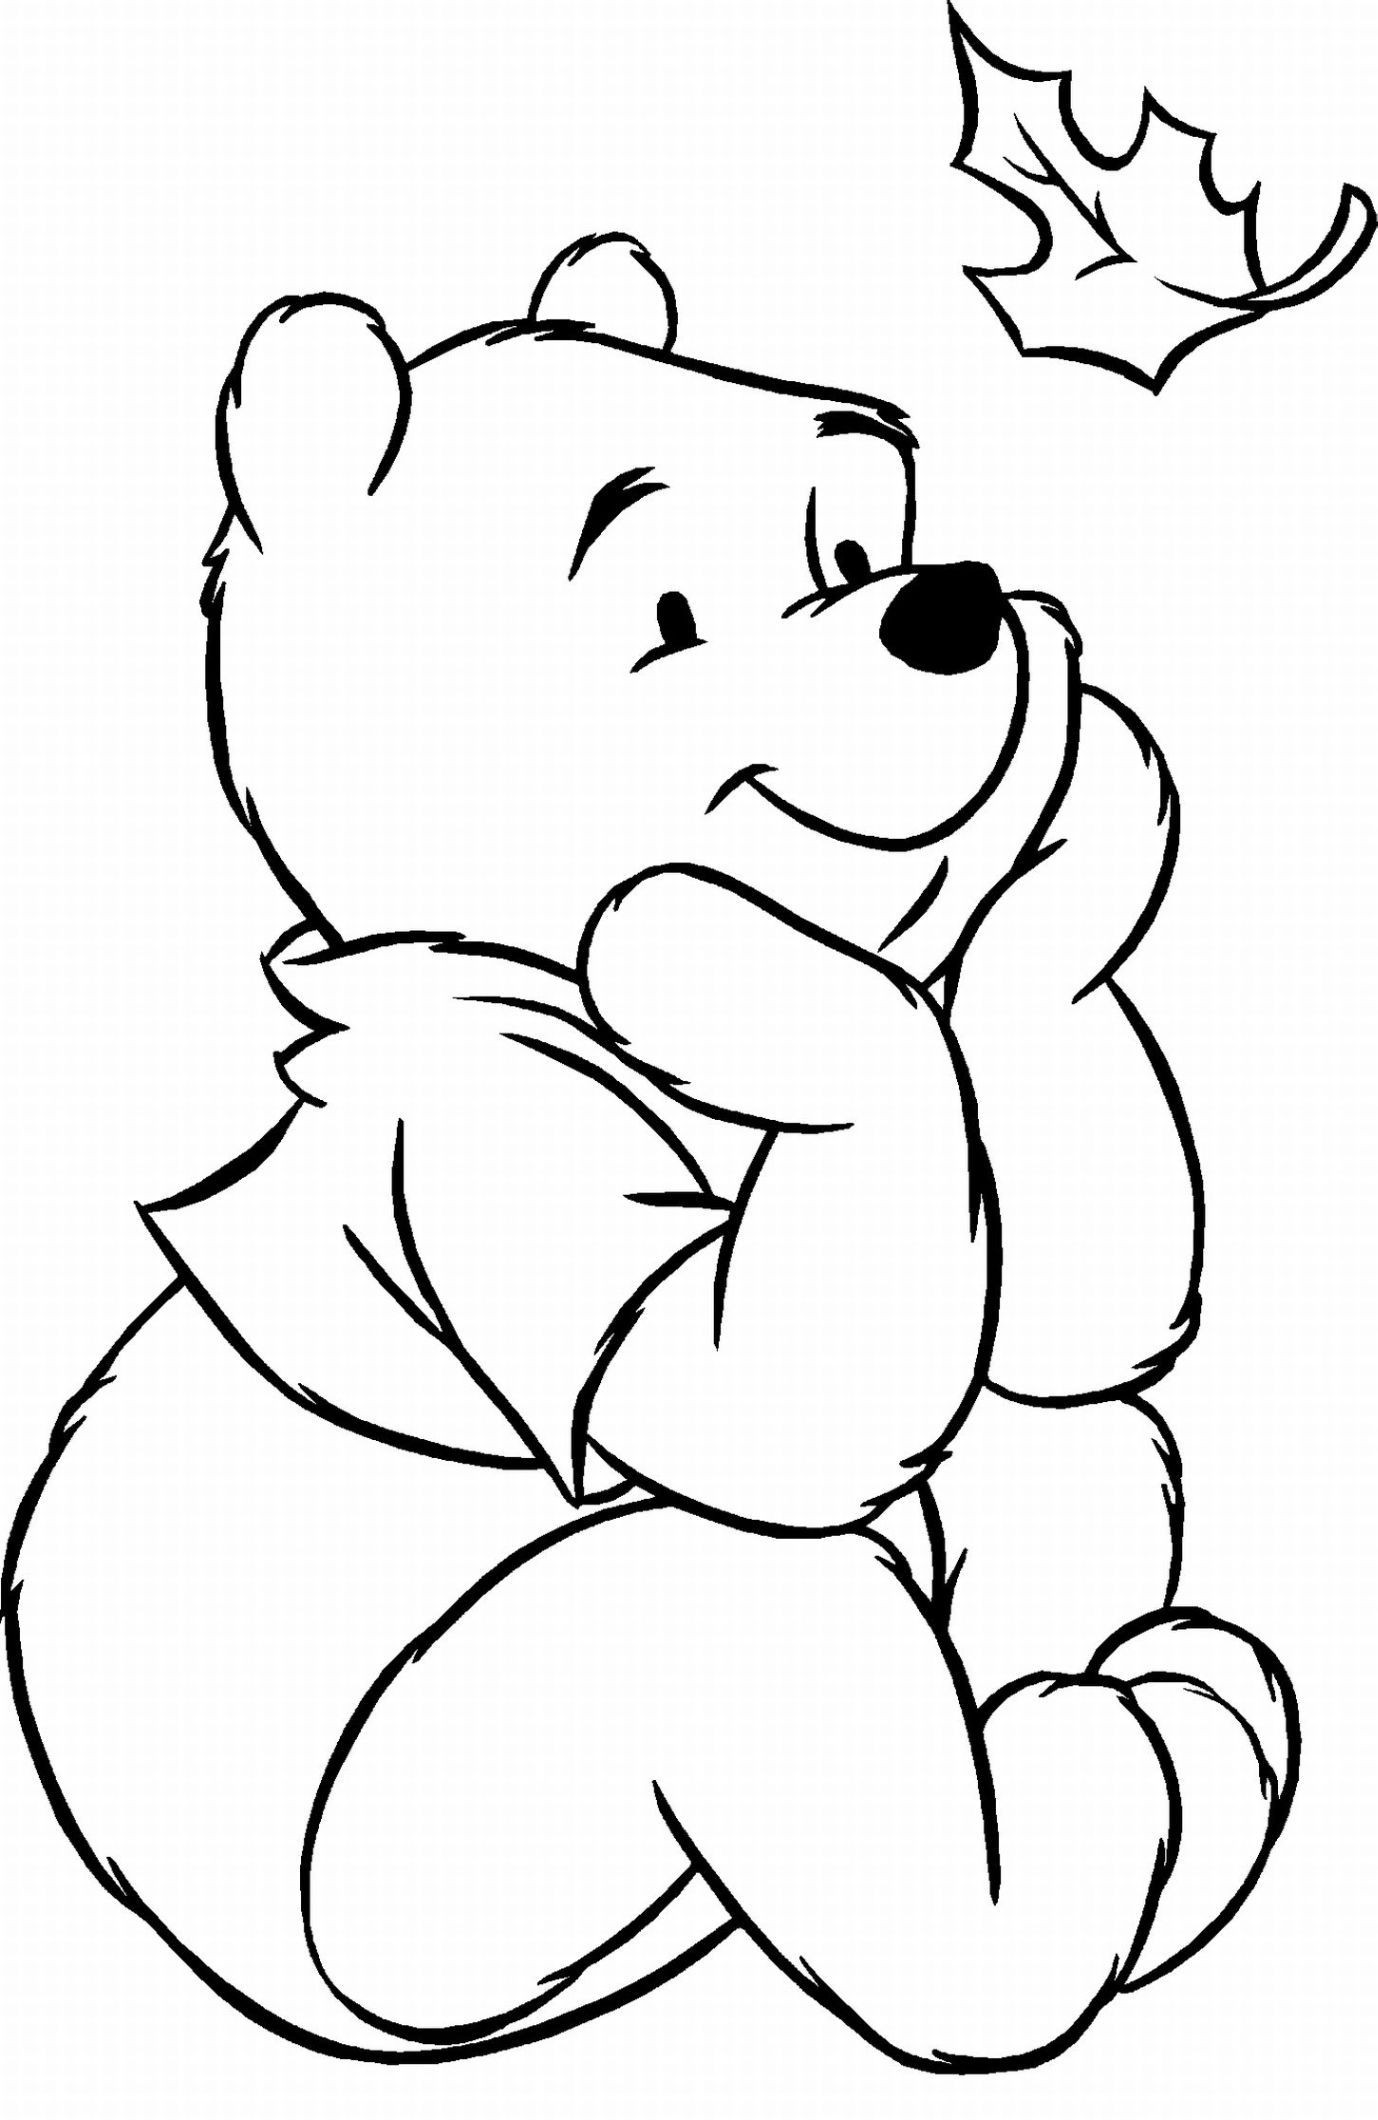 Free Disney Coloring Pages For Kids
 disney coloring pages for kids to print out 01